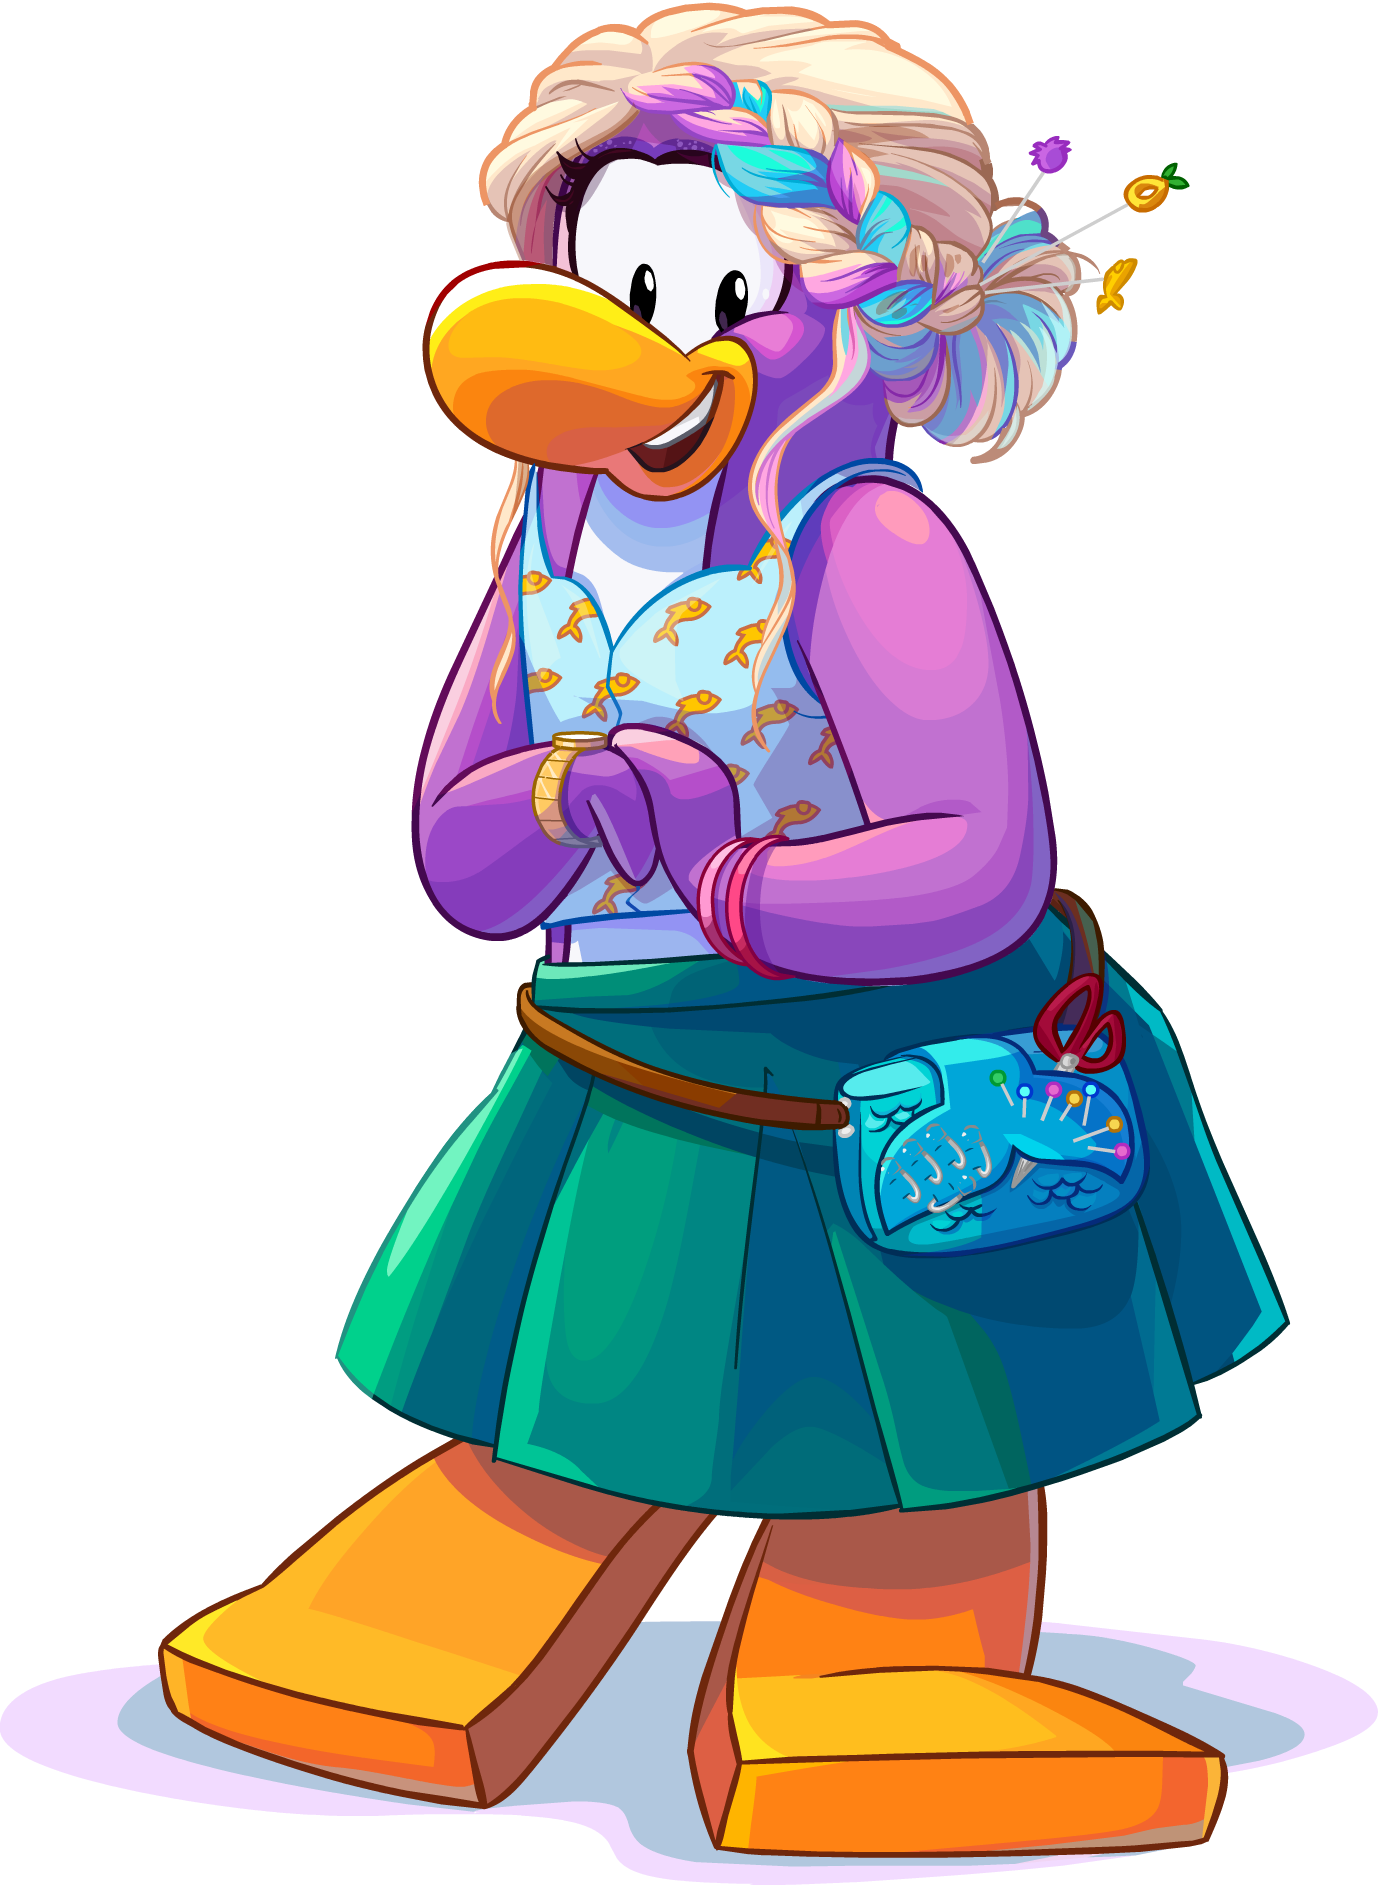 club penguin coloring pages for girls